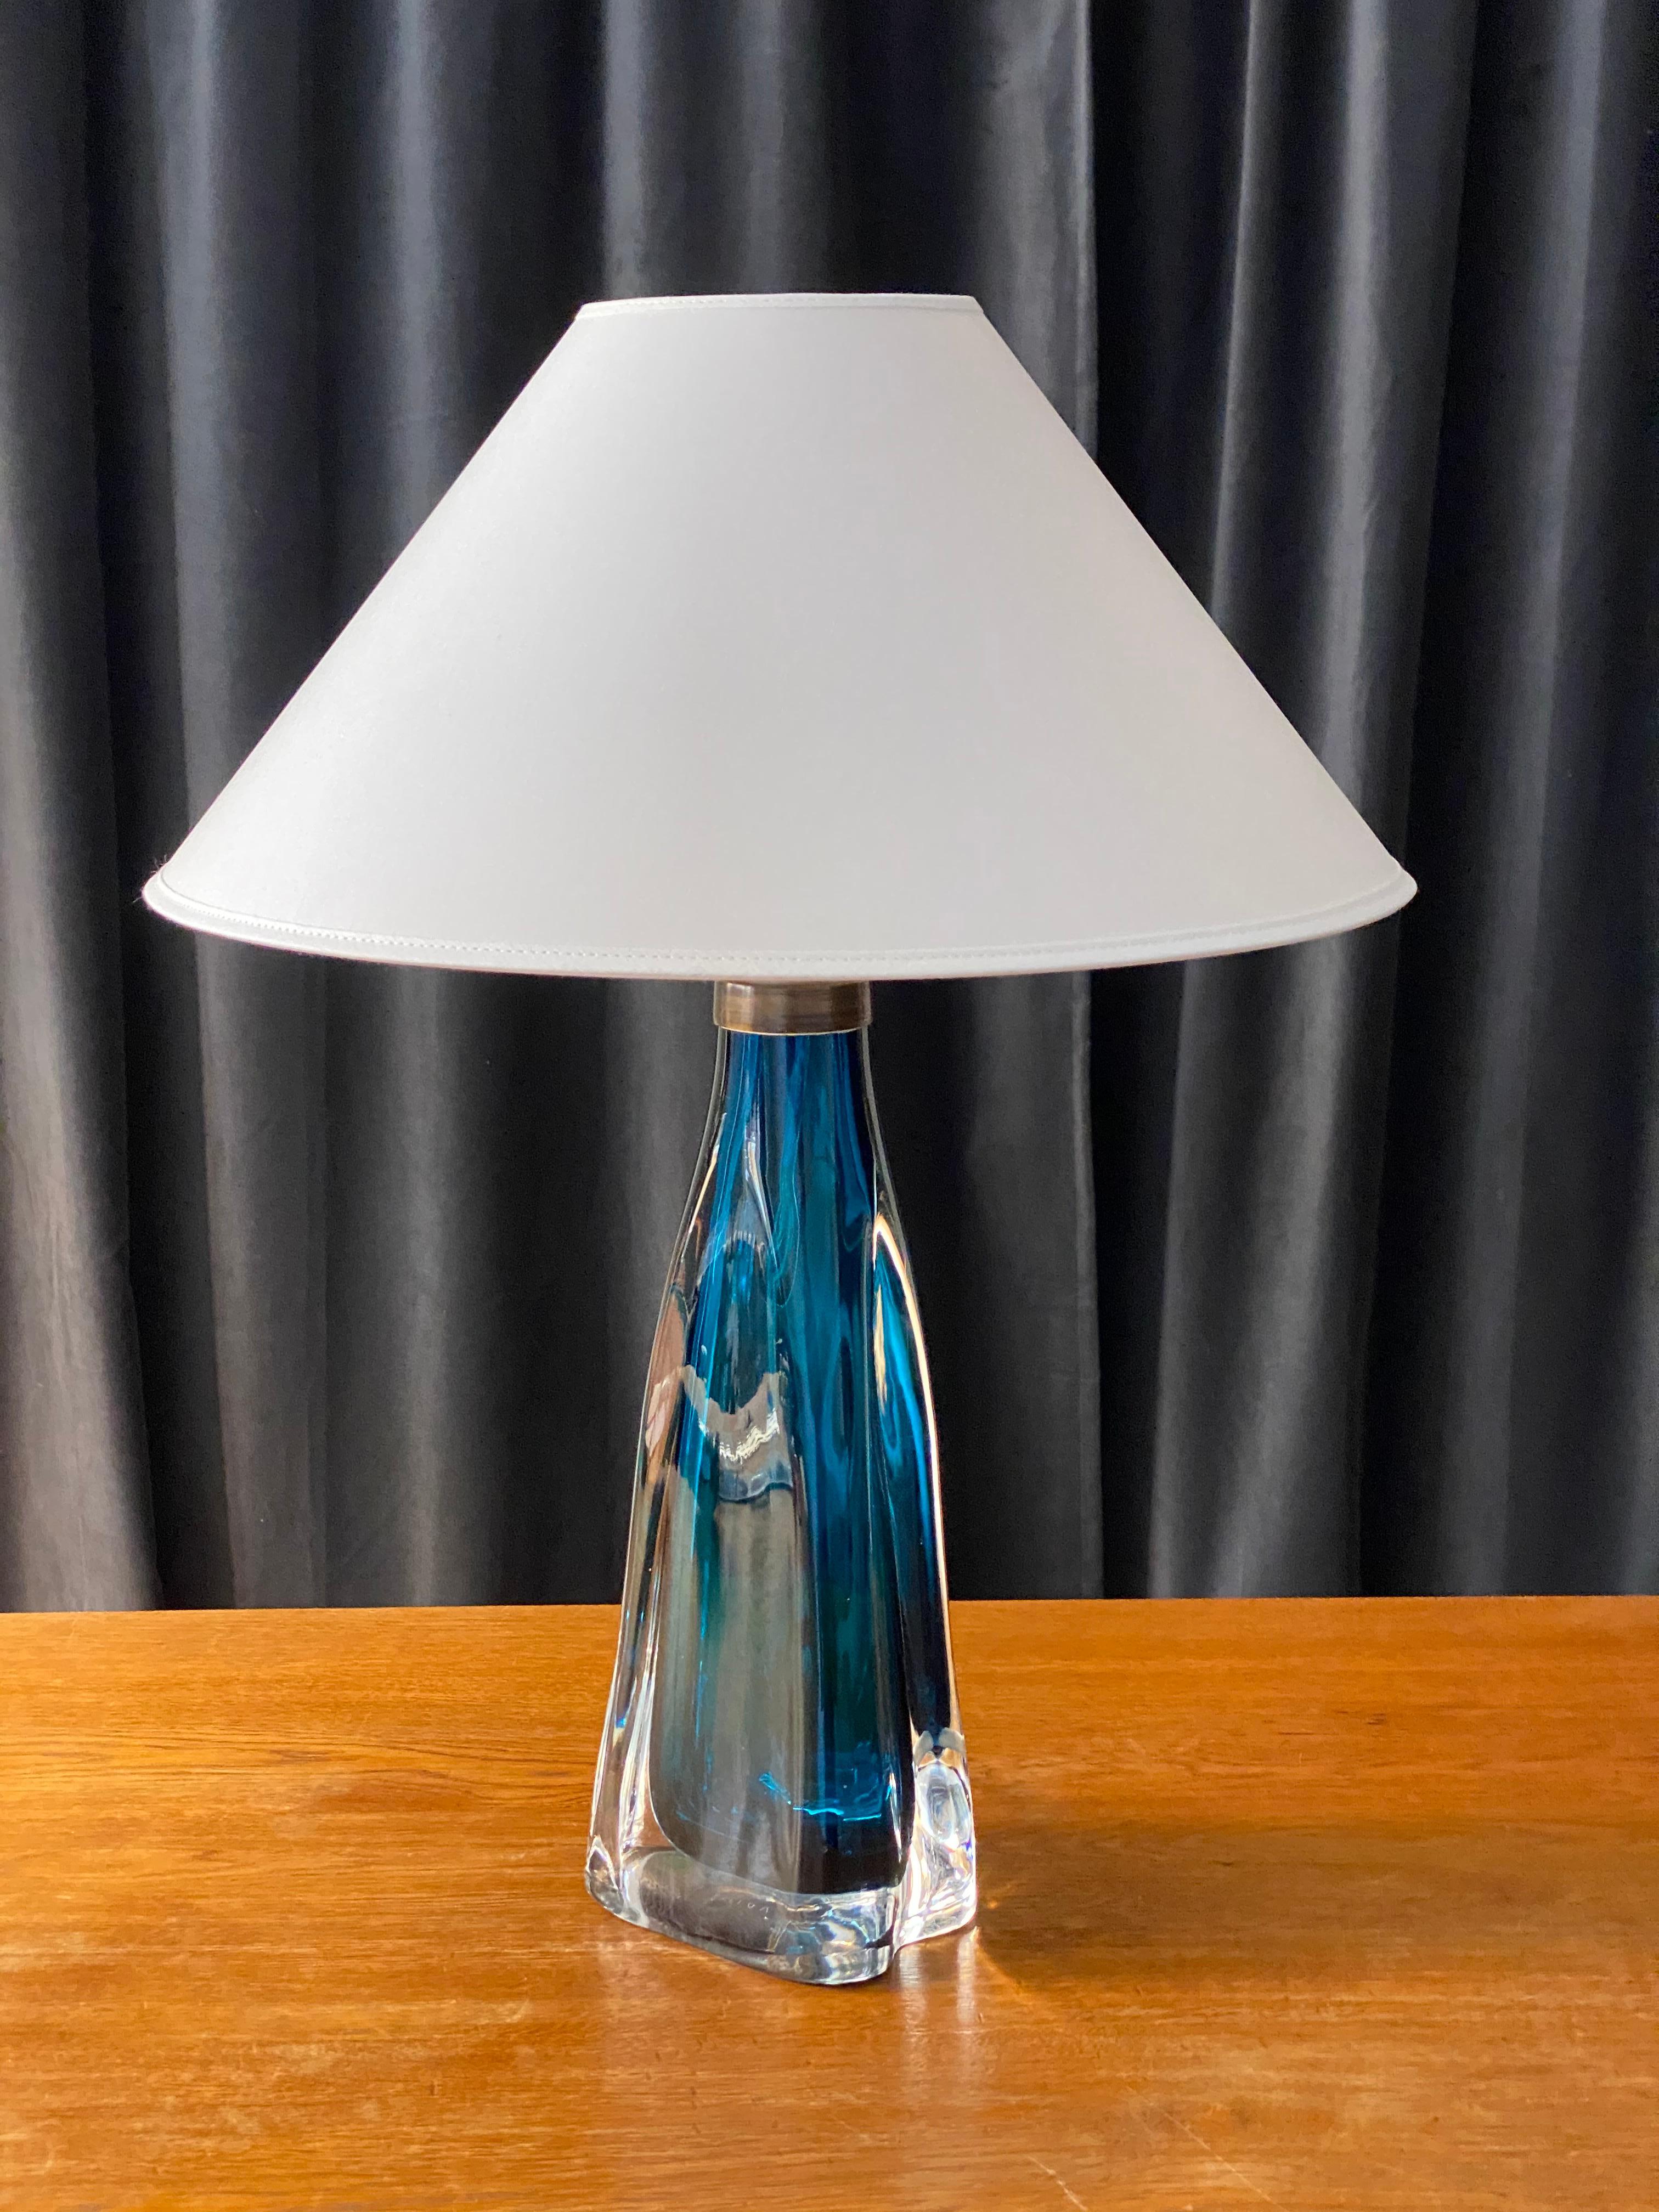 A sizable organic table lamp designed by Carl Fagerlund for Orrefors, where he served as a lighting designer from 1946-1980. Lamp is executed in lead glass. Partially blue-stained. Sold without lampshade.

In addition to product design for Orrefors